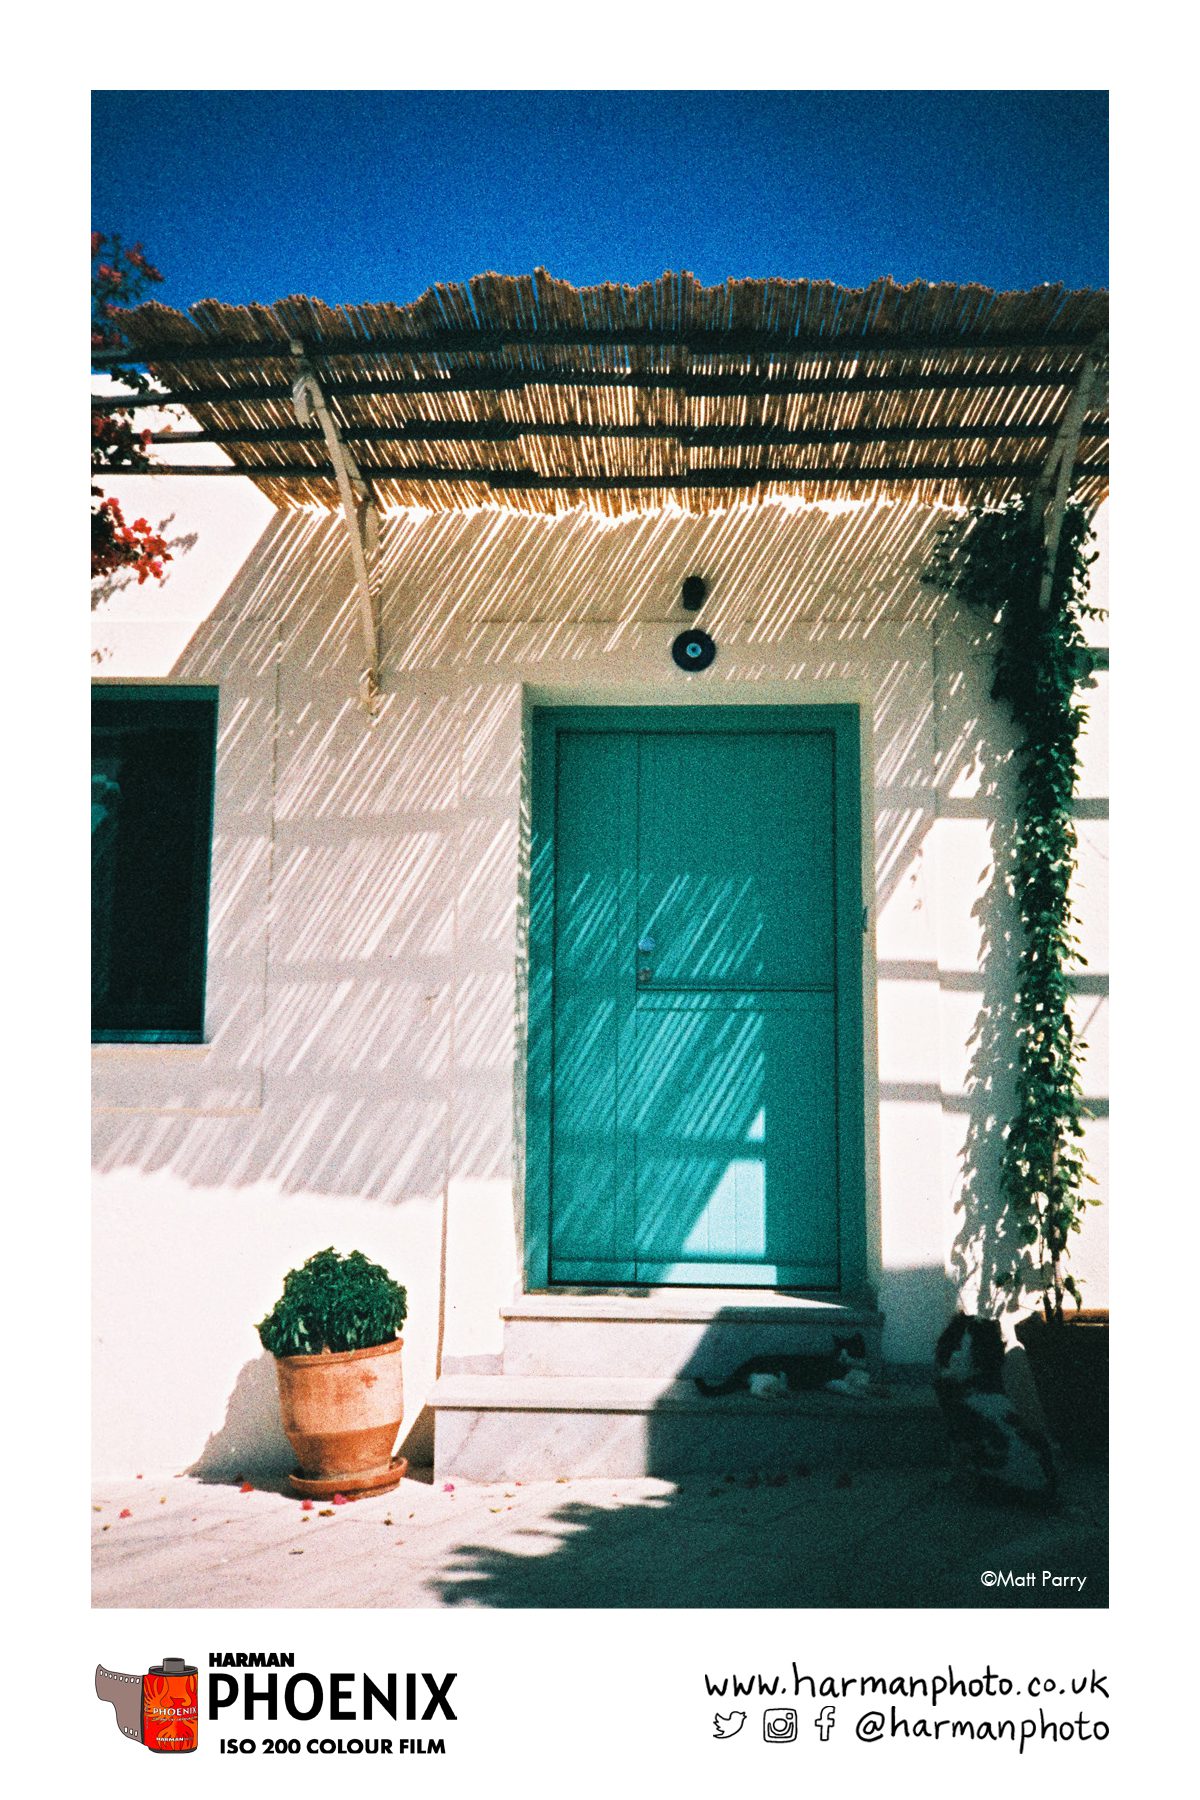 Blue door on a white building in Greece which plants on the doorstep. Shot on HARMAN Phoenix colour film